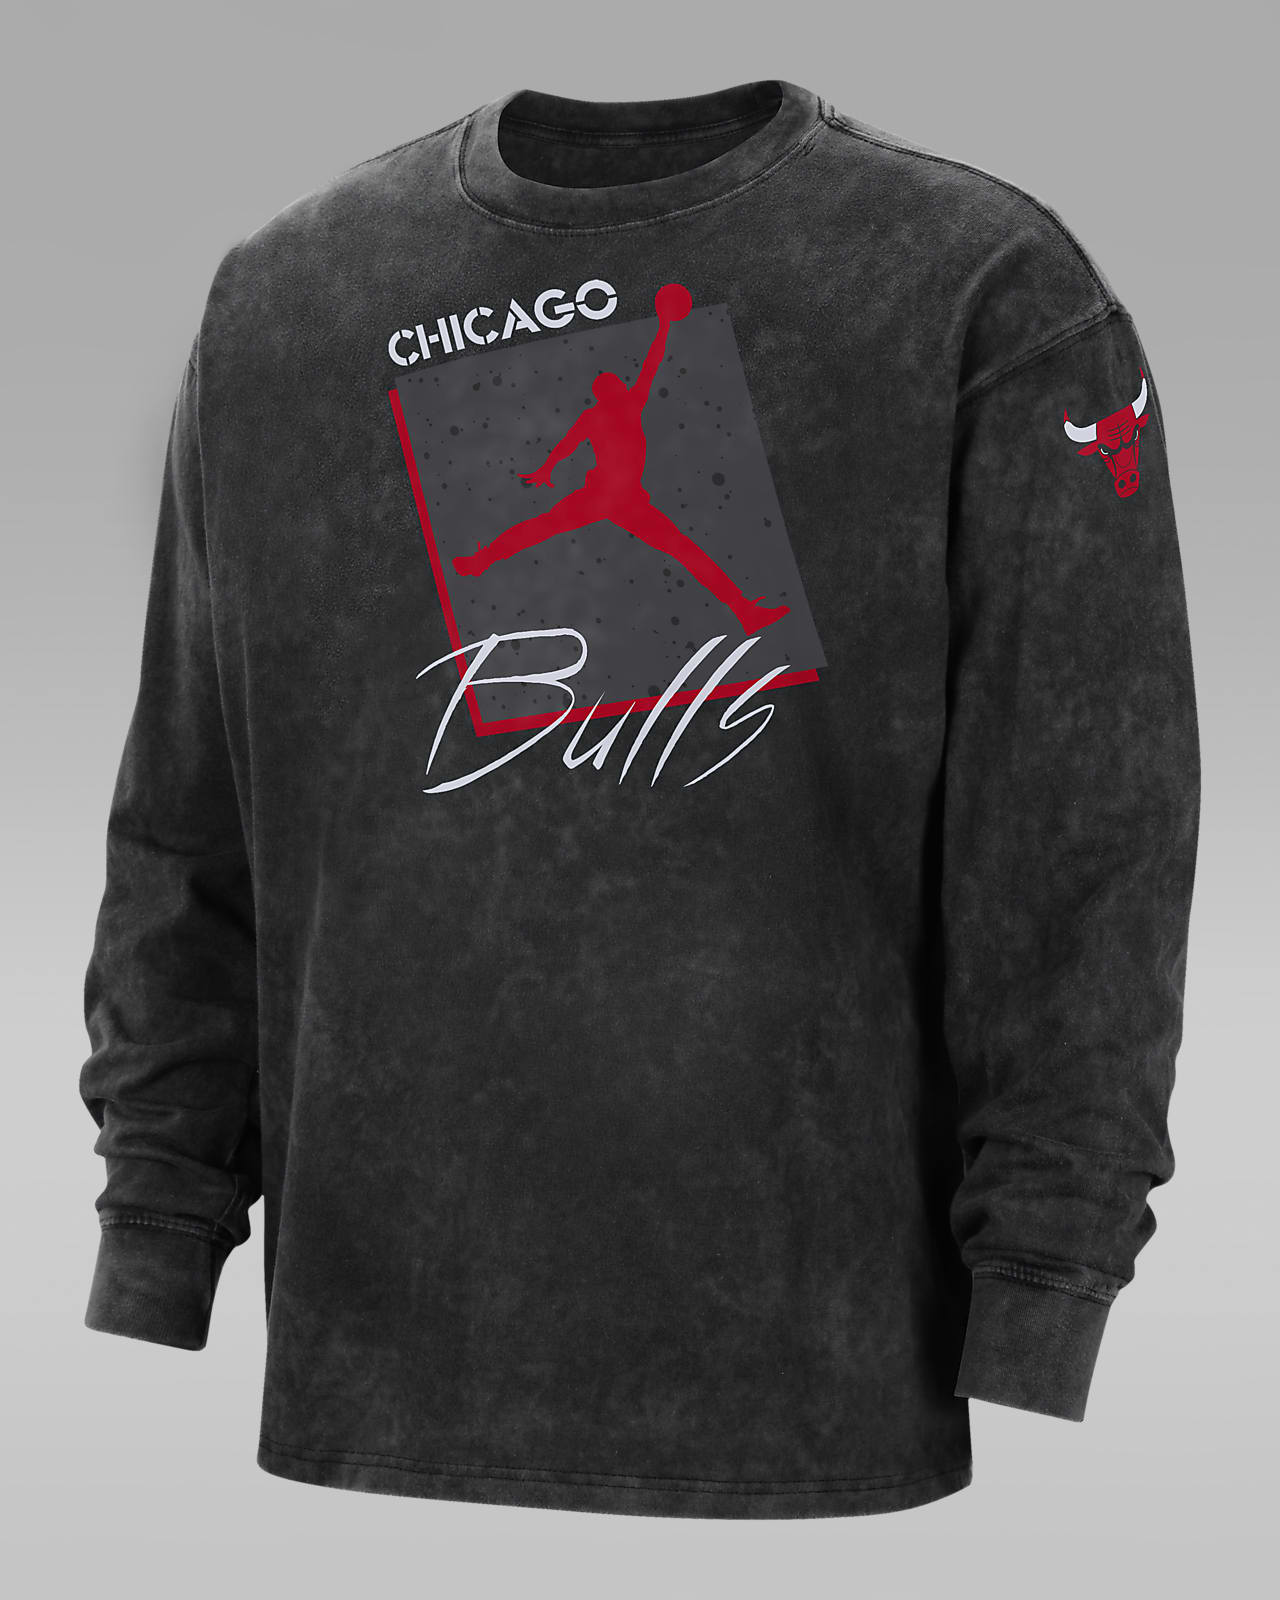 Buy Vintage Chicago Bulls Shirt Online In India -  India